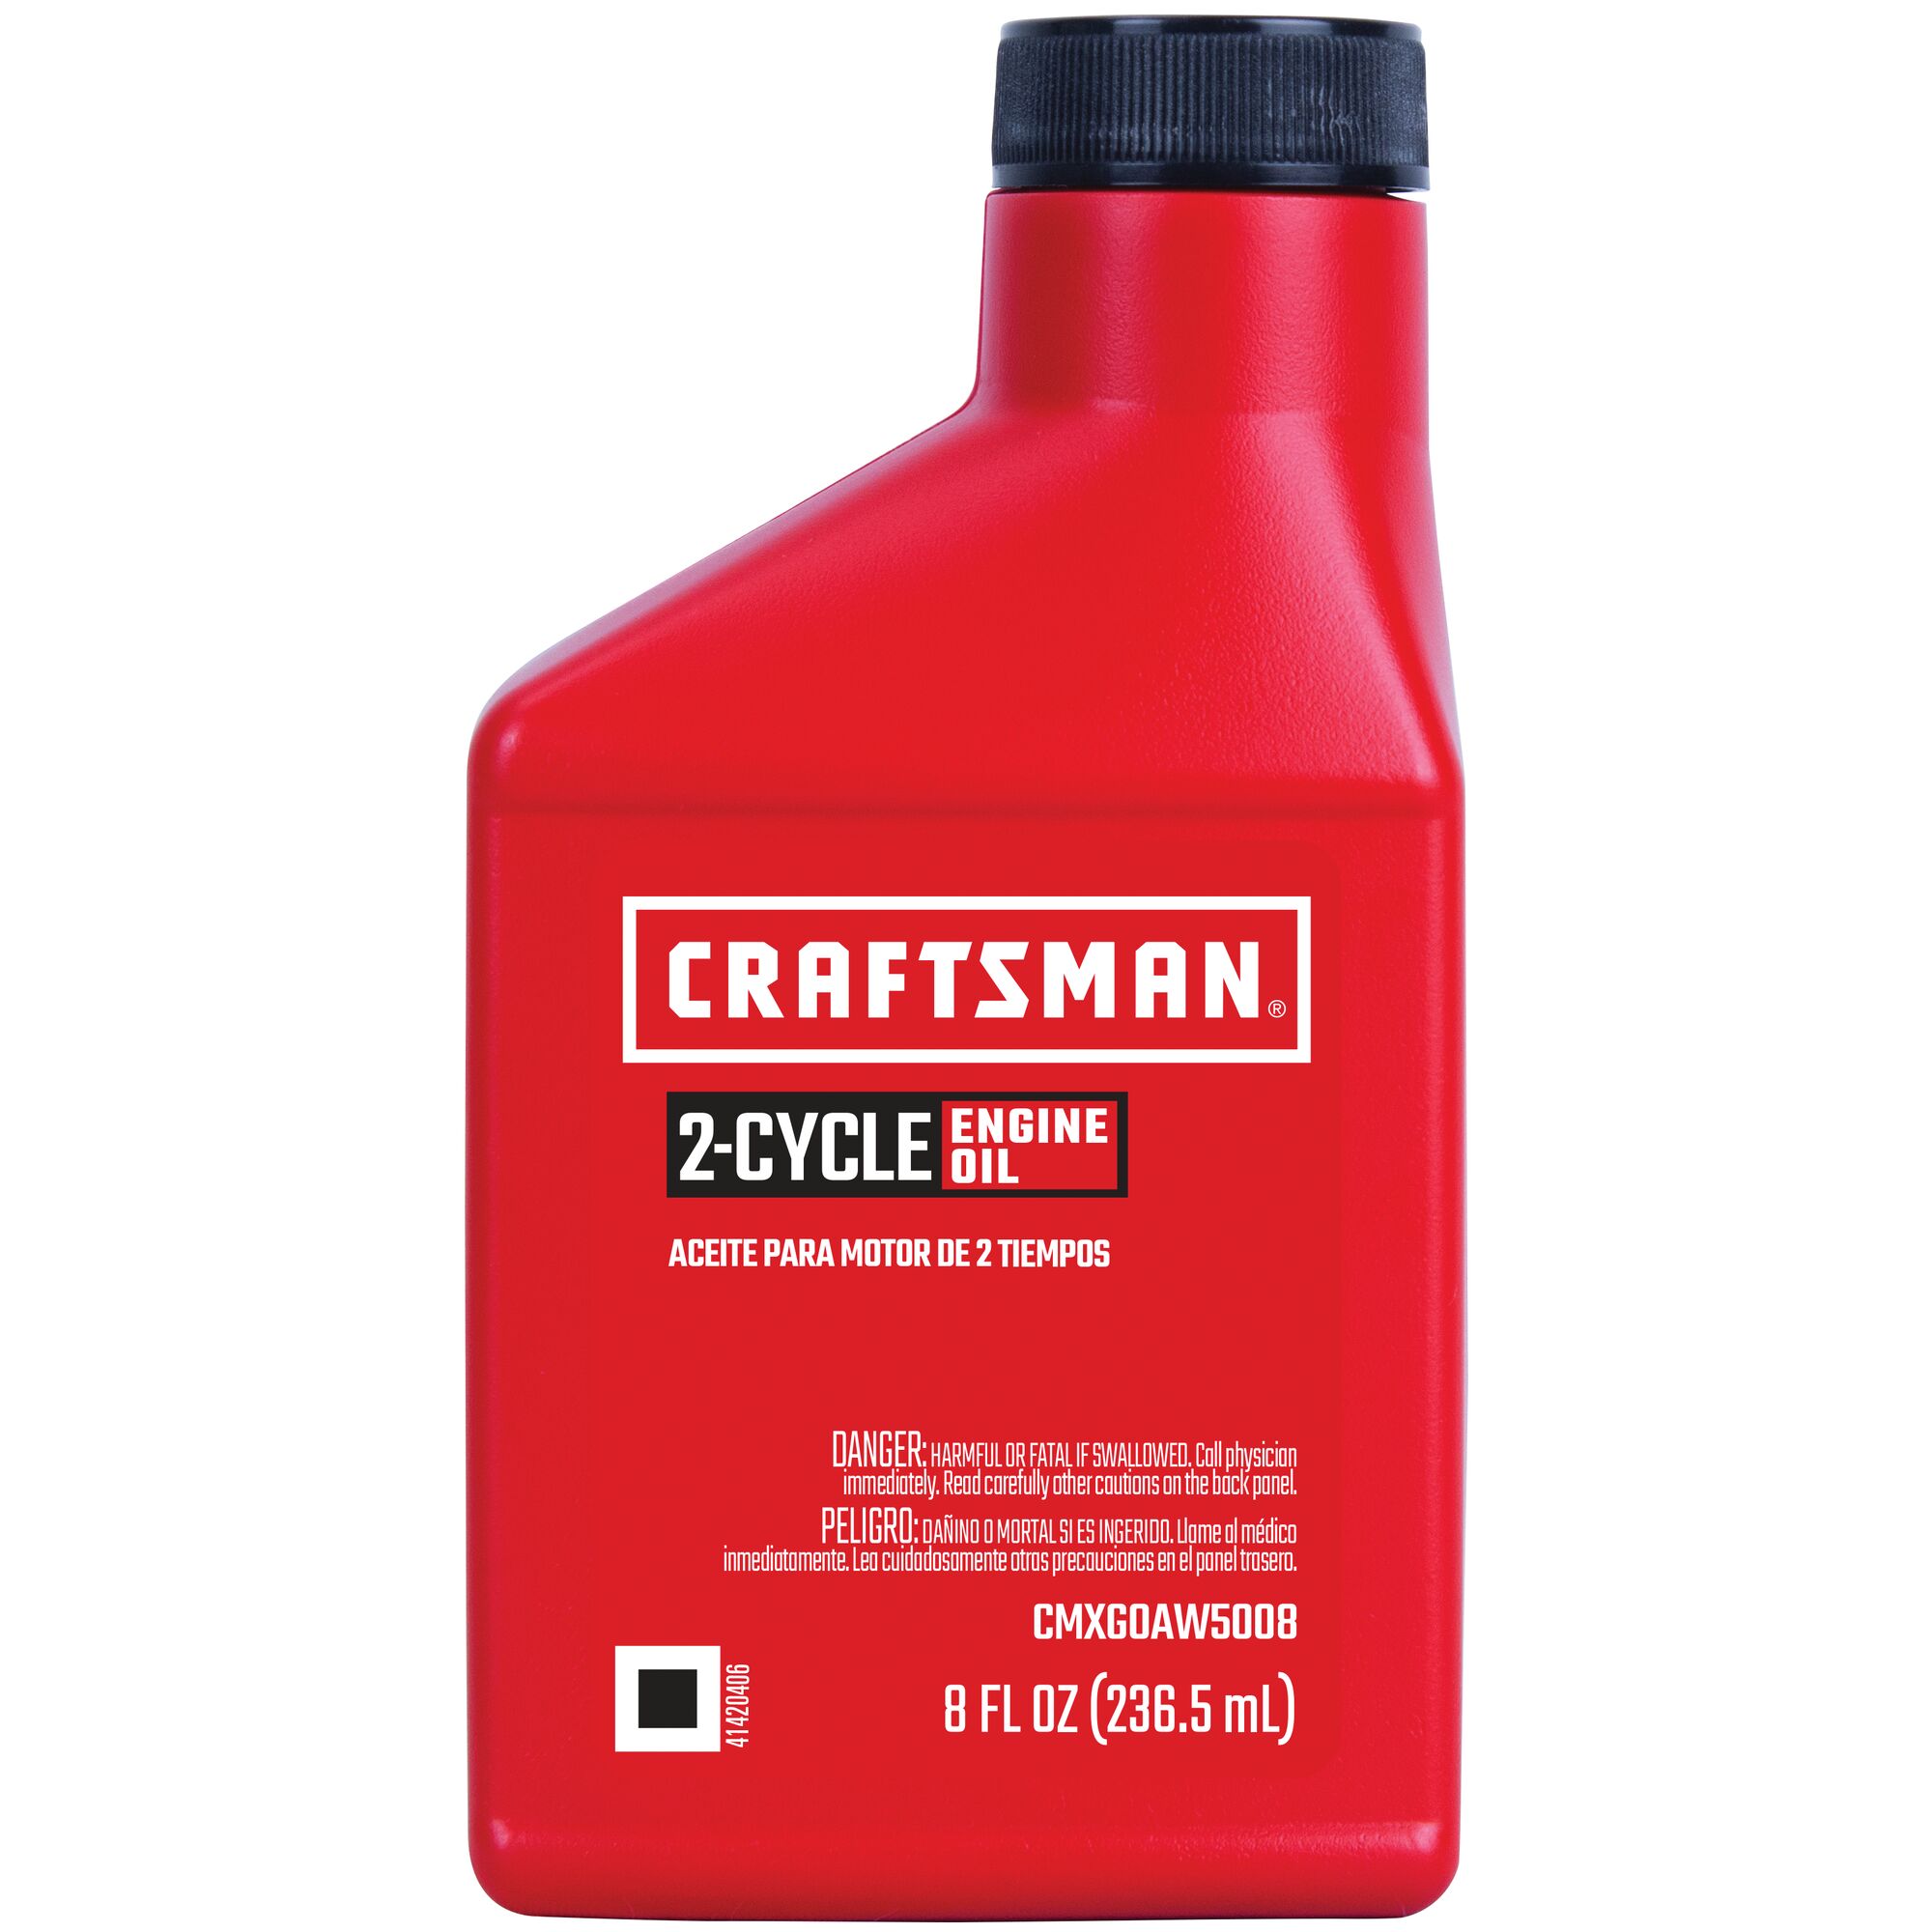 Craftsman universal 2 cycle 227 g engine oil.